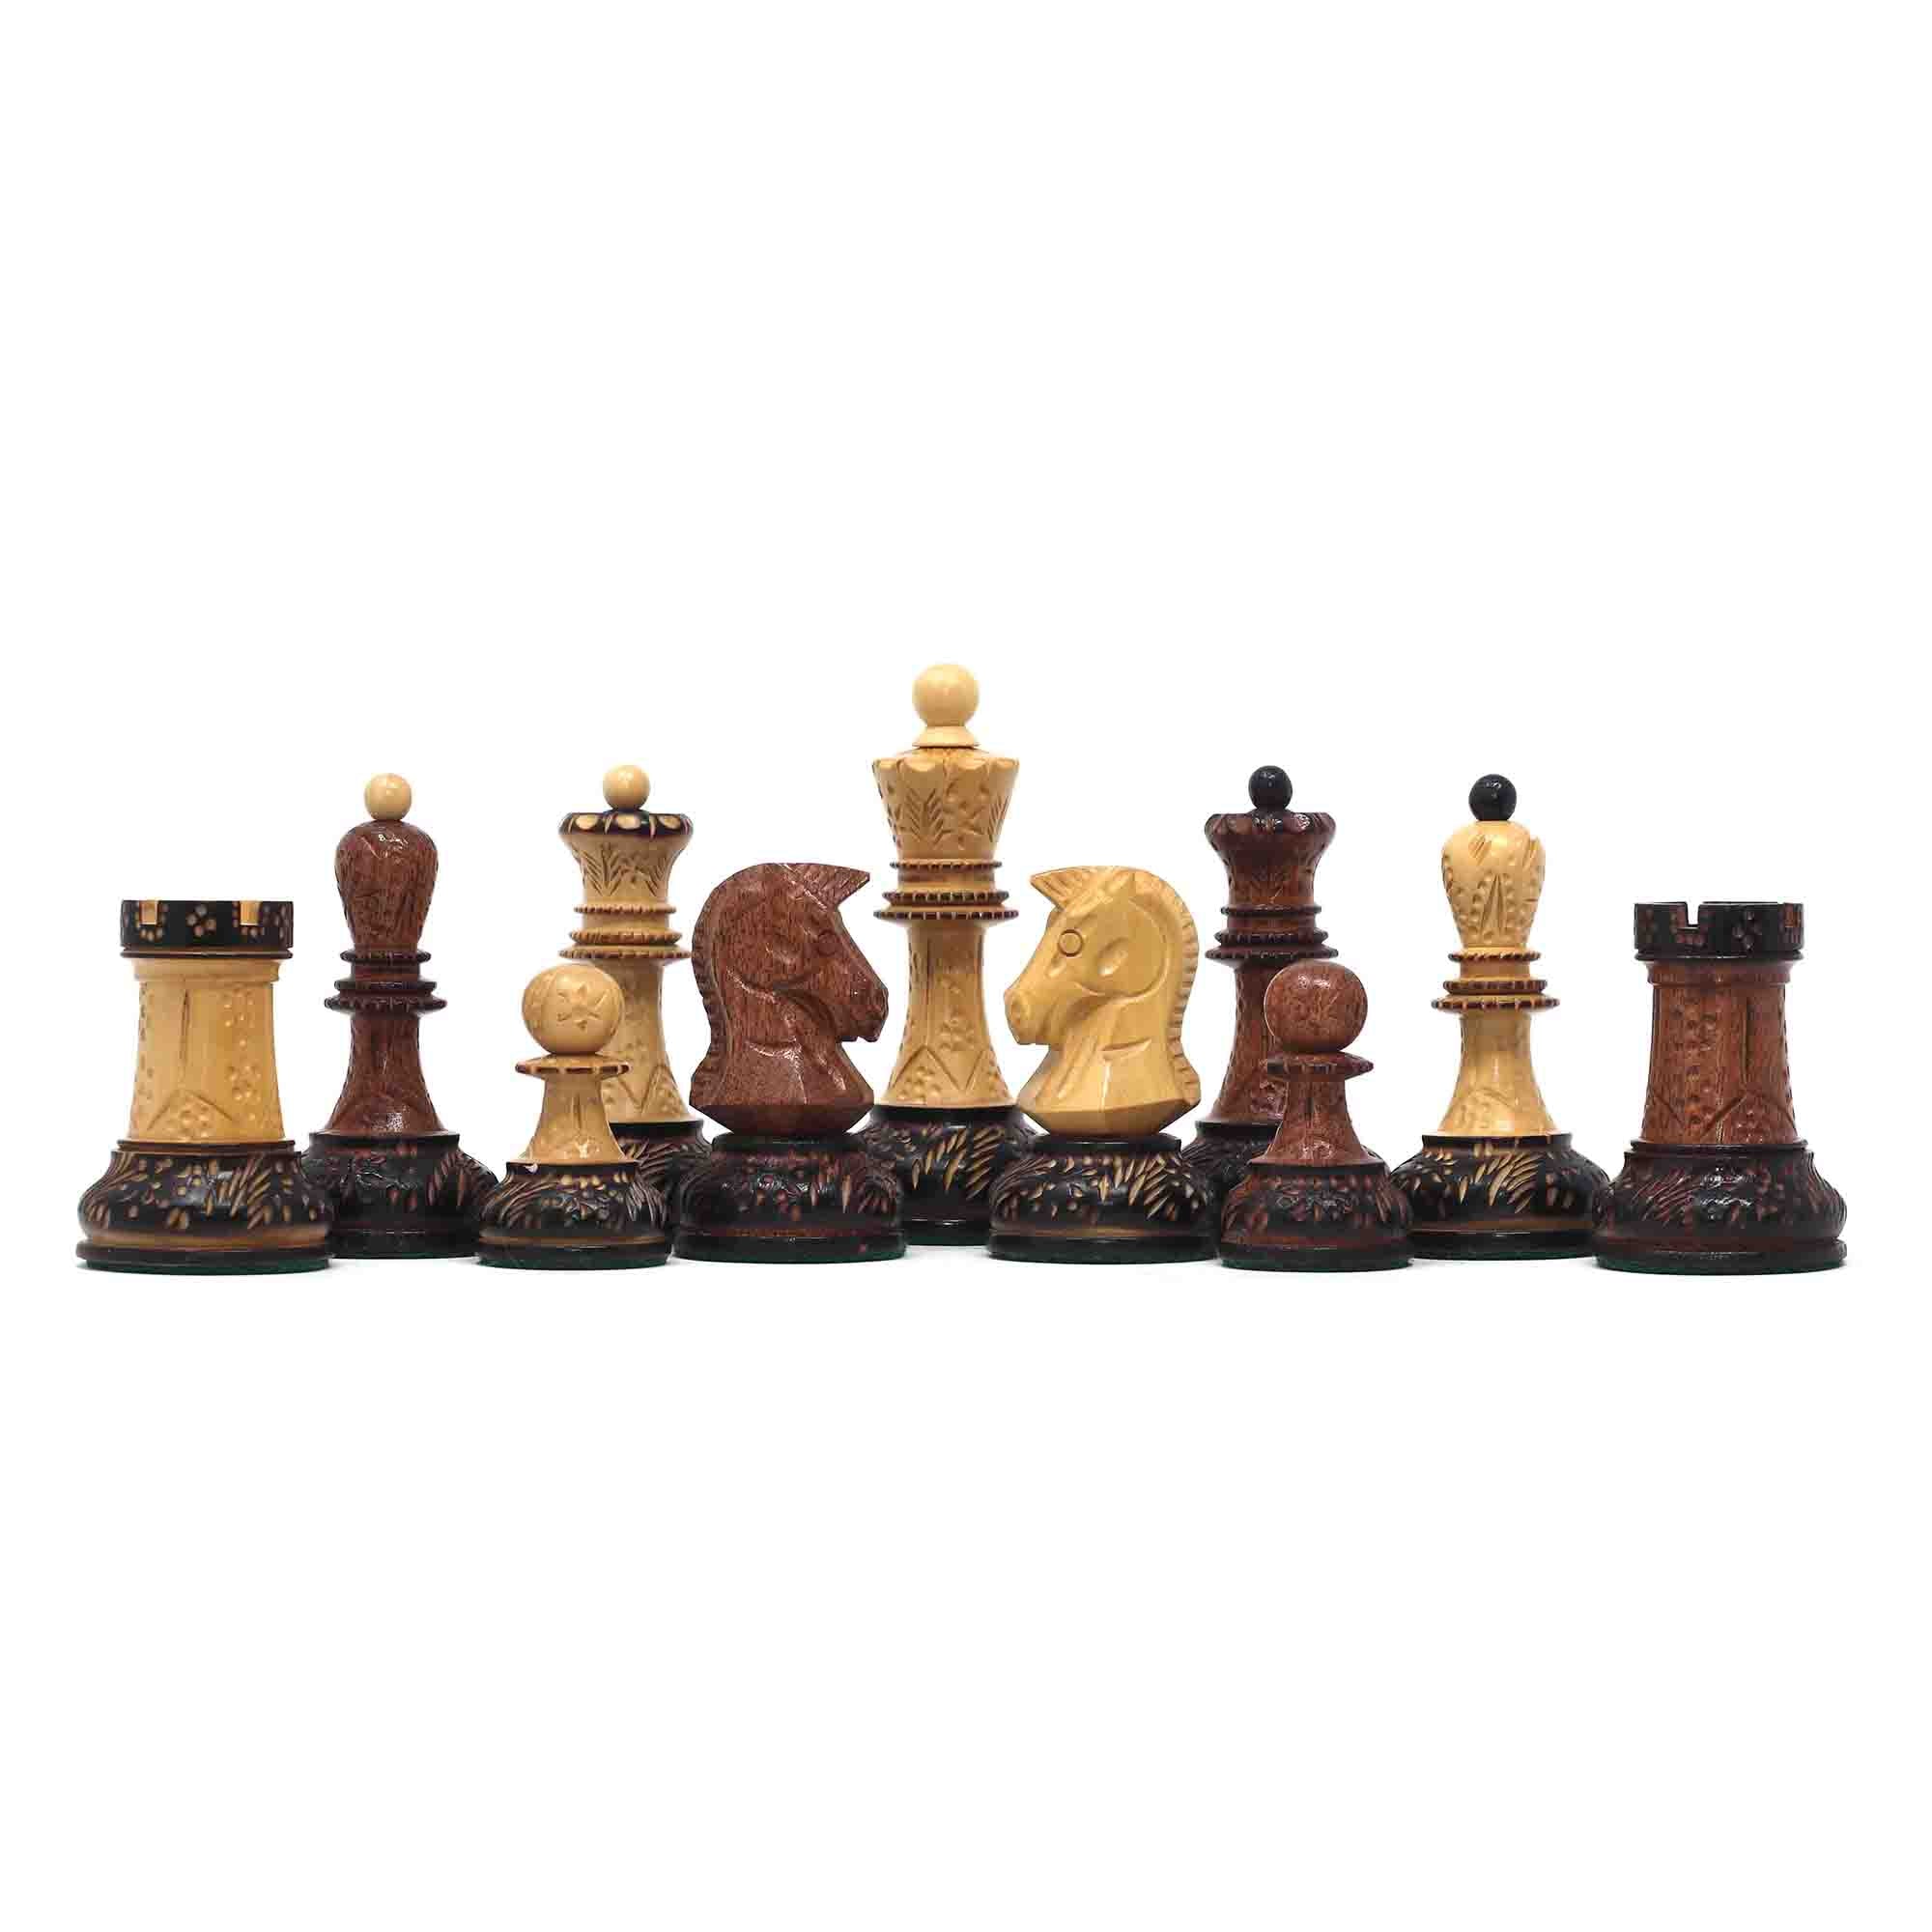 Dubrovink Series 1970 Reproduction 3.75" Luxury Burnt Accacia / Boxwood Chess Set